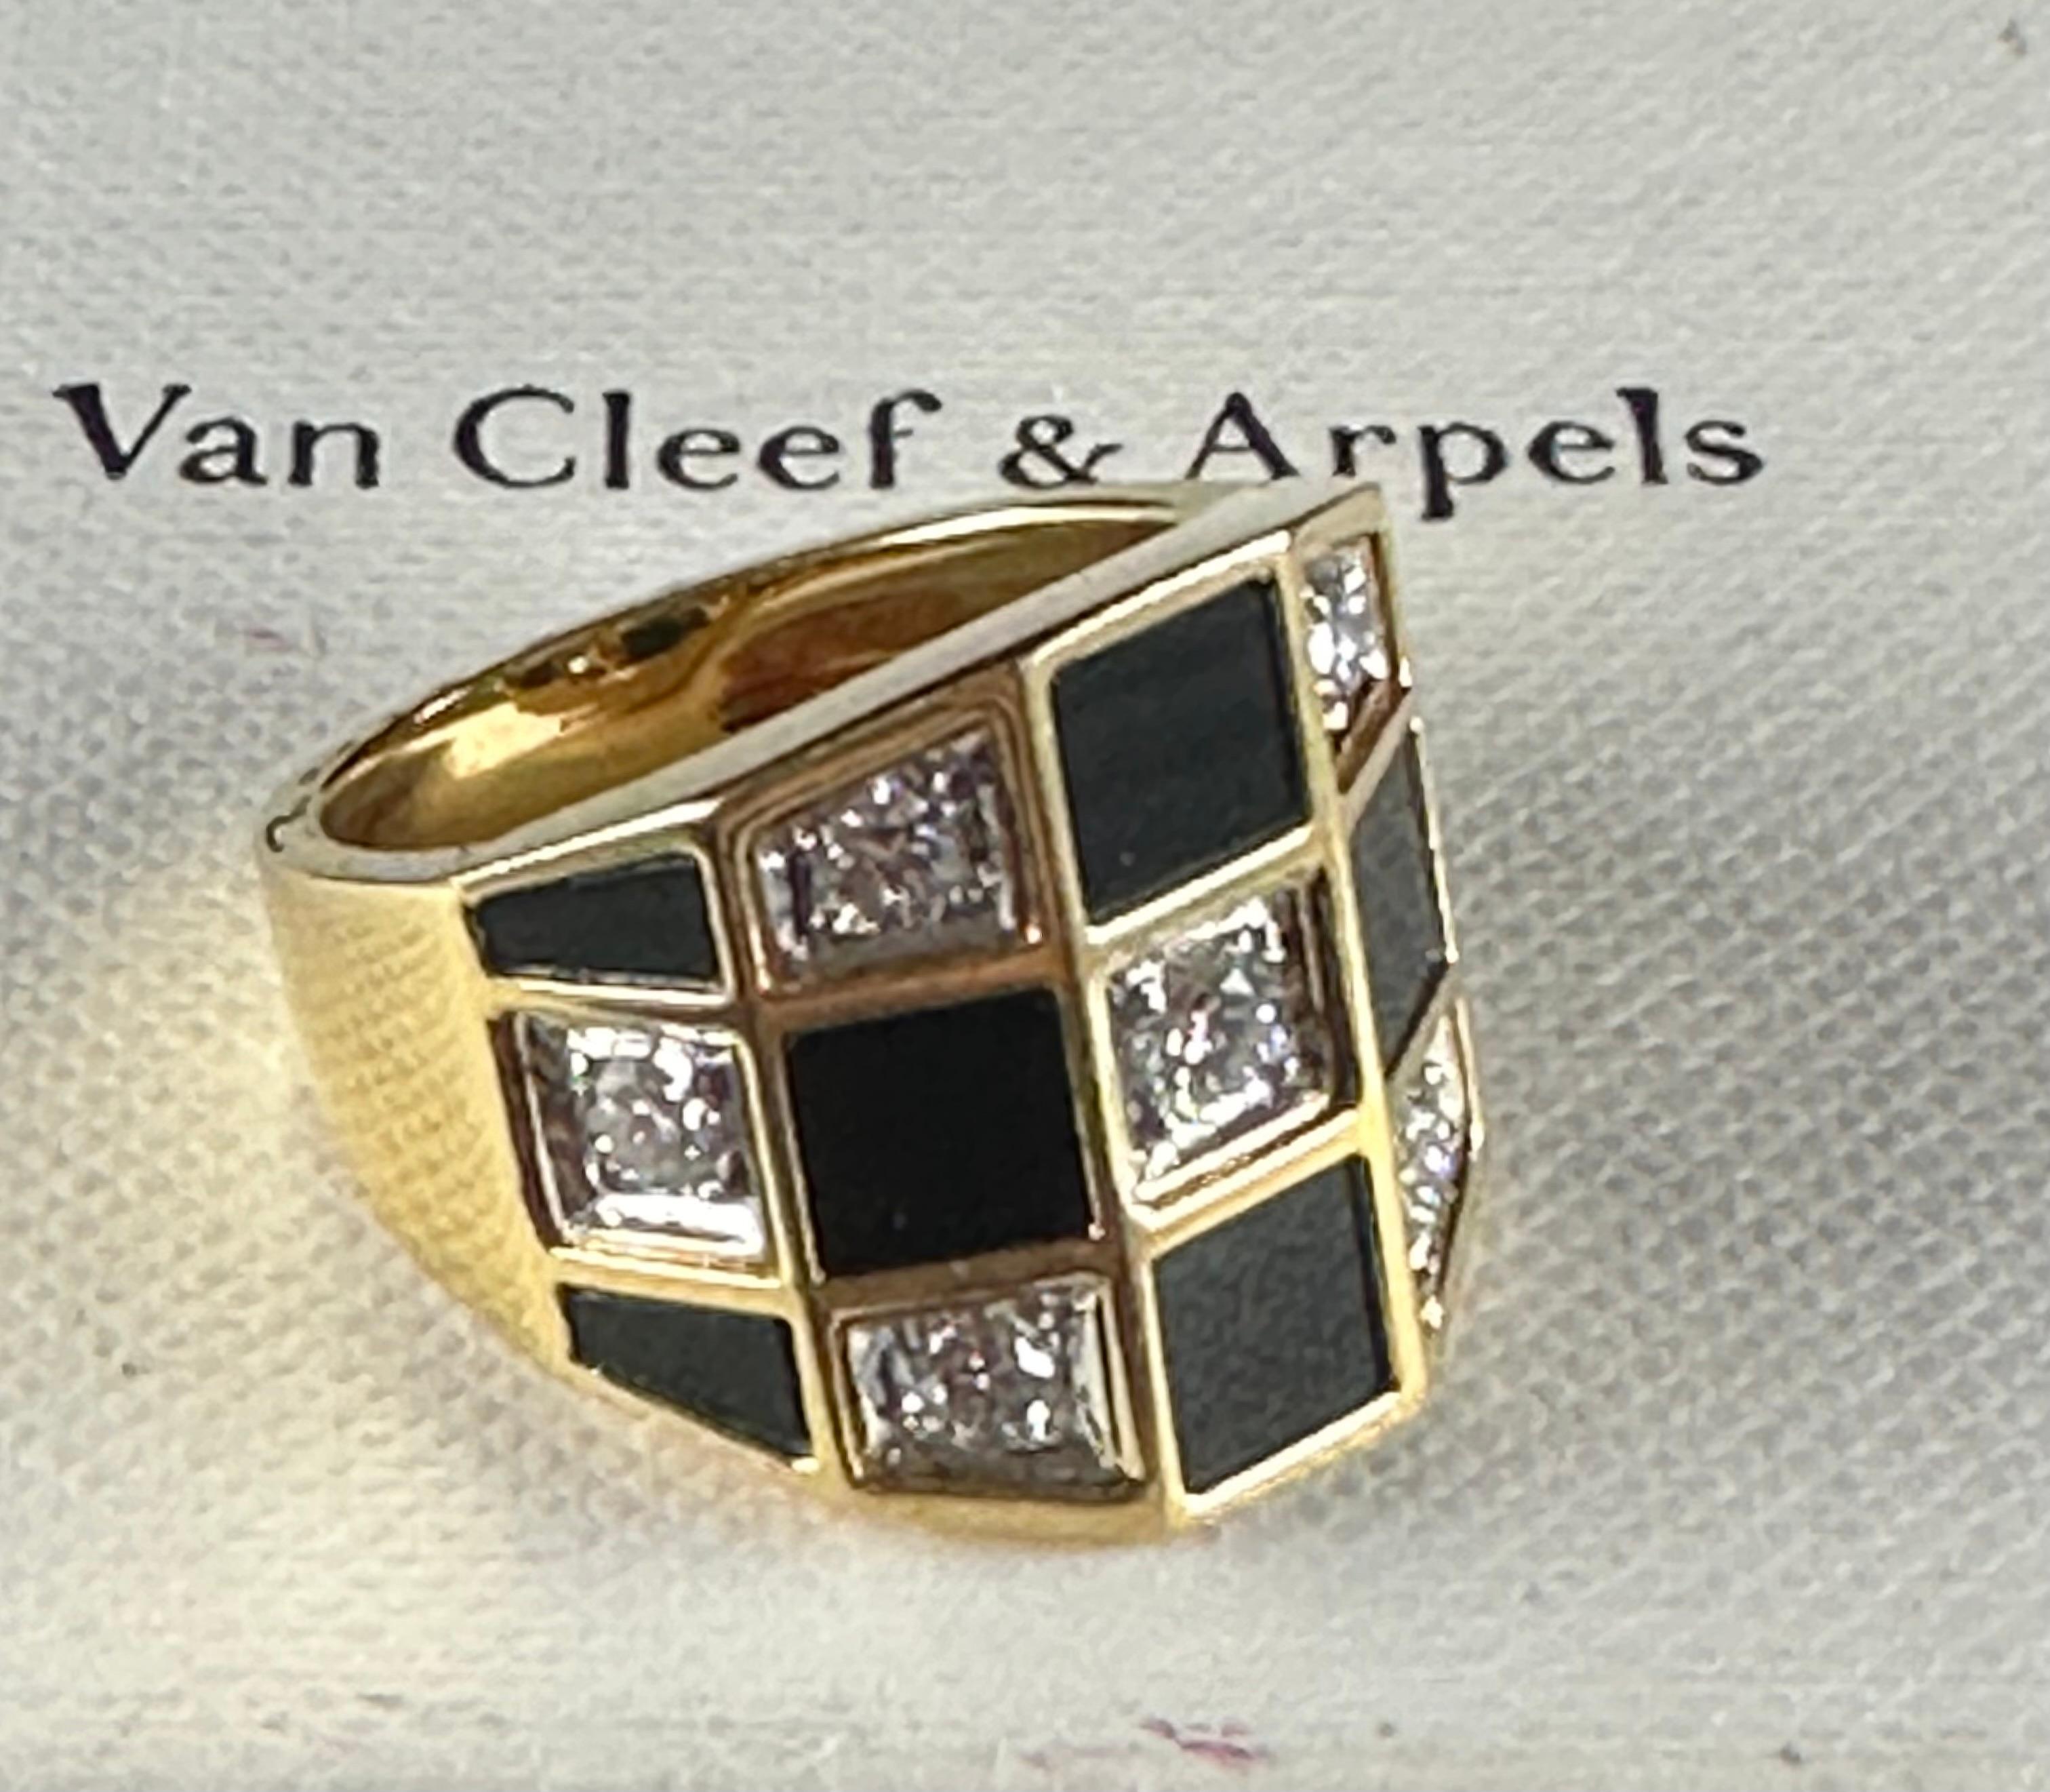 Van Cleef and Arpels circa 1960s diamond & black onyx checkerboard drawbridge shaped cocktail ring , French Hallmark size 5 and can be resized. See seven round diamond and eight black onyx inlaid depicting the ceckerboard.  Immerse yourself in the